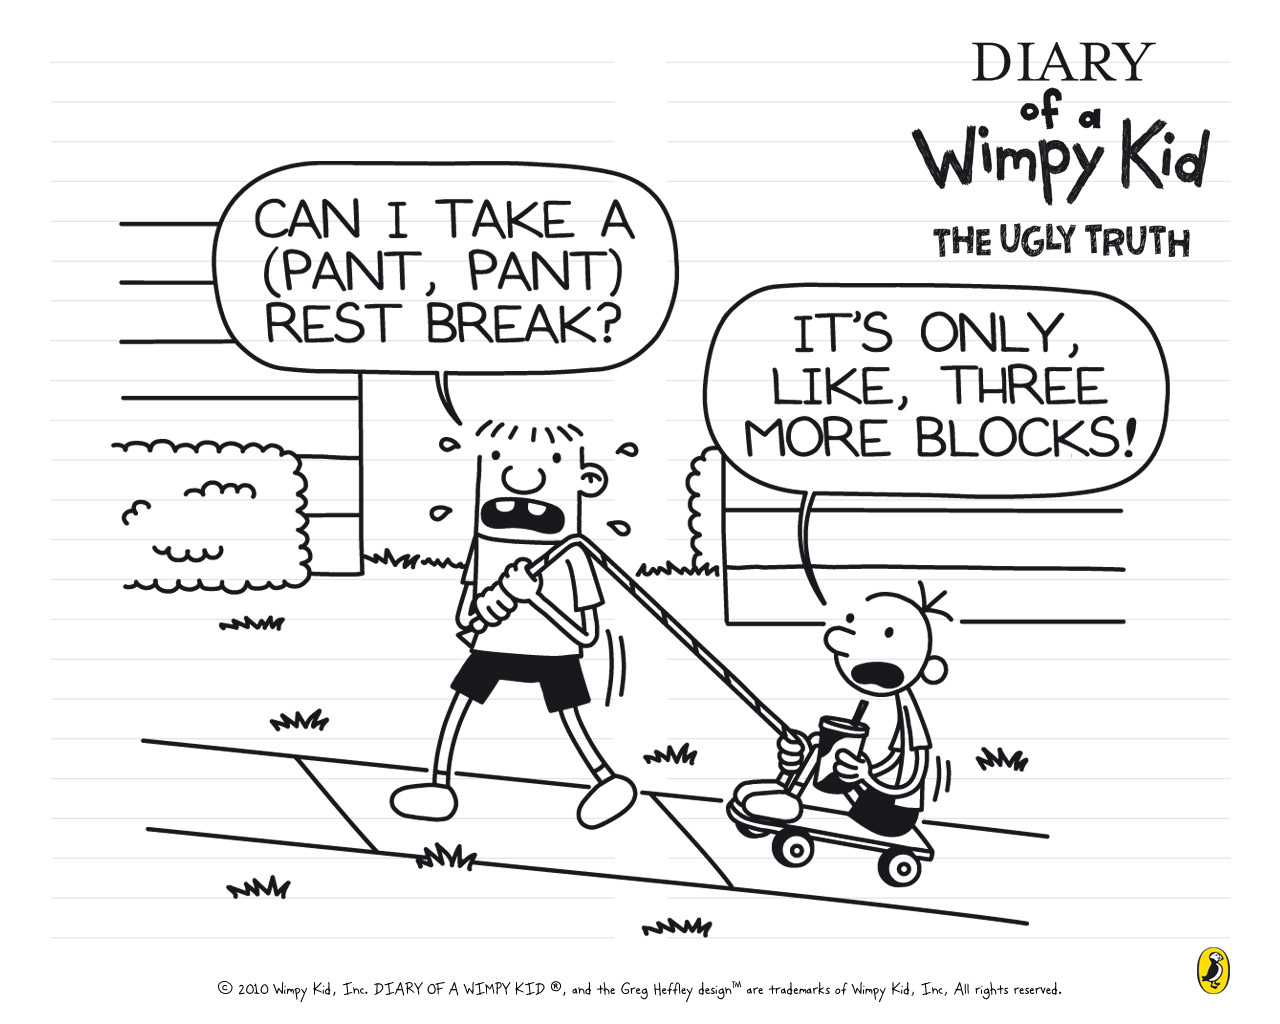 Wimpy Kid Wallpaper - Diary Of A Wimpy Kid The Ugly Truth , HD Wallpaper & Backgrounds